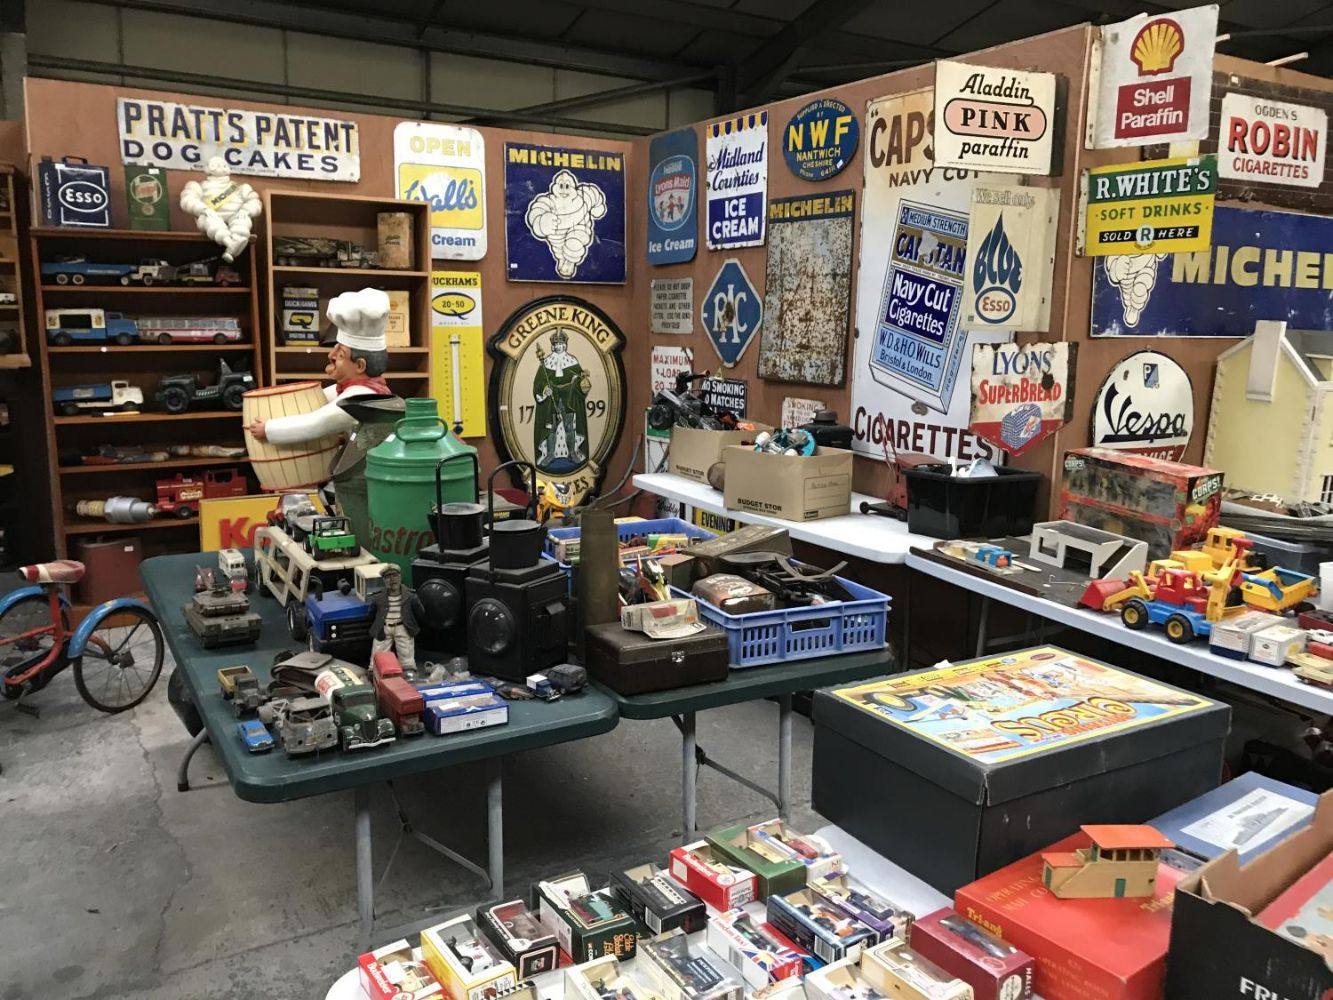 Two Day Auction Of Collectables, Antiques, Furniture, Vintage Items, inc a section for Jewellery, sporting memorabilia, Wines and Spirits